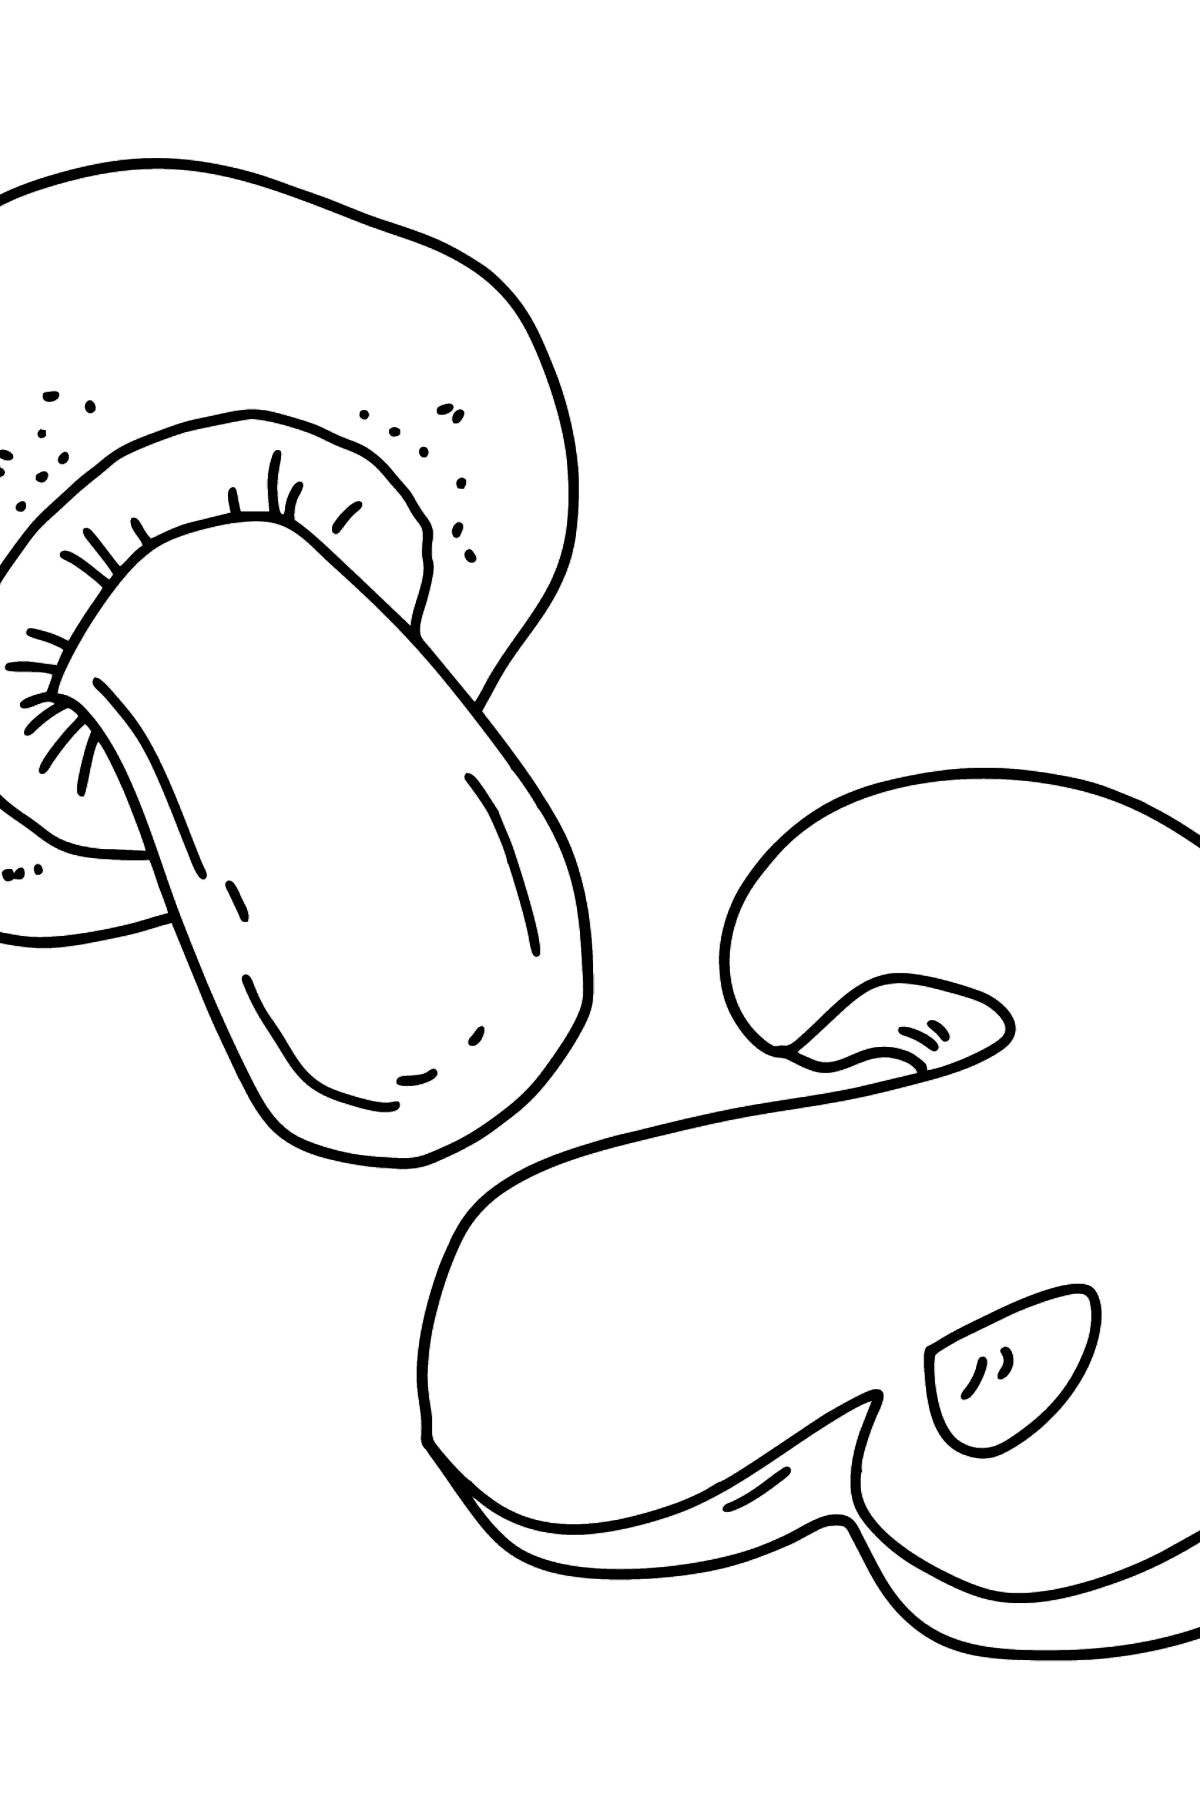 Royal Champignons coloring page - Coloring Pages for Kids